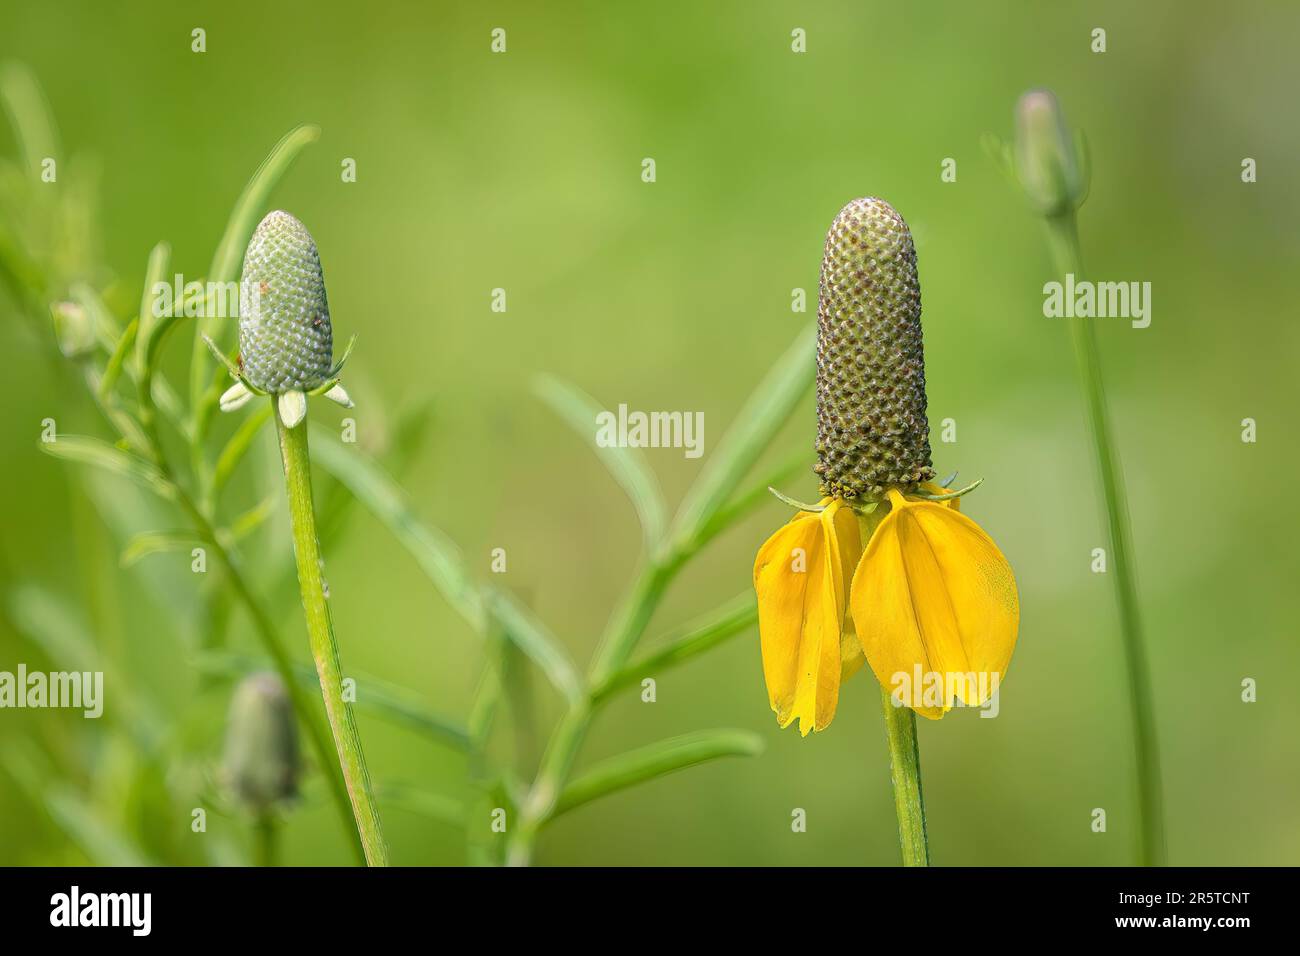 A Yellow Mexican Hat Flower Stock Photo